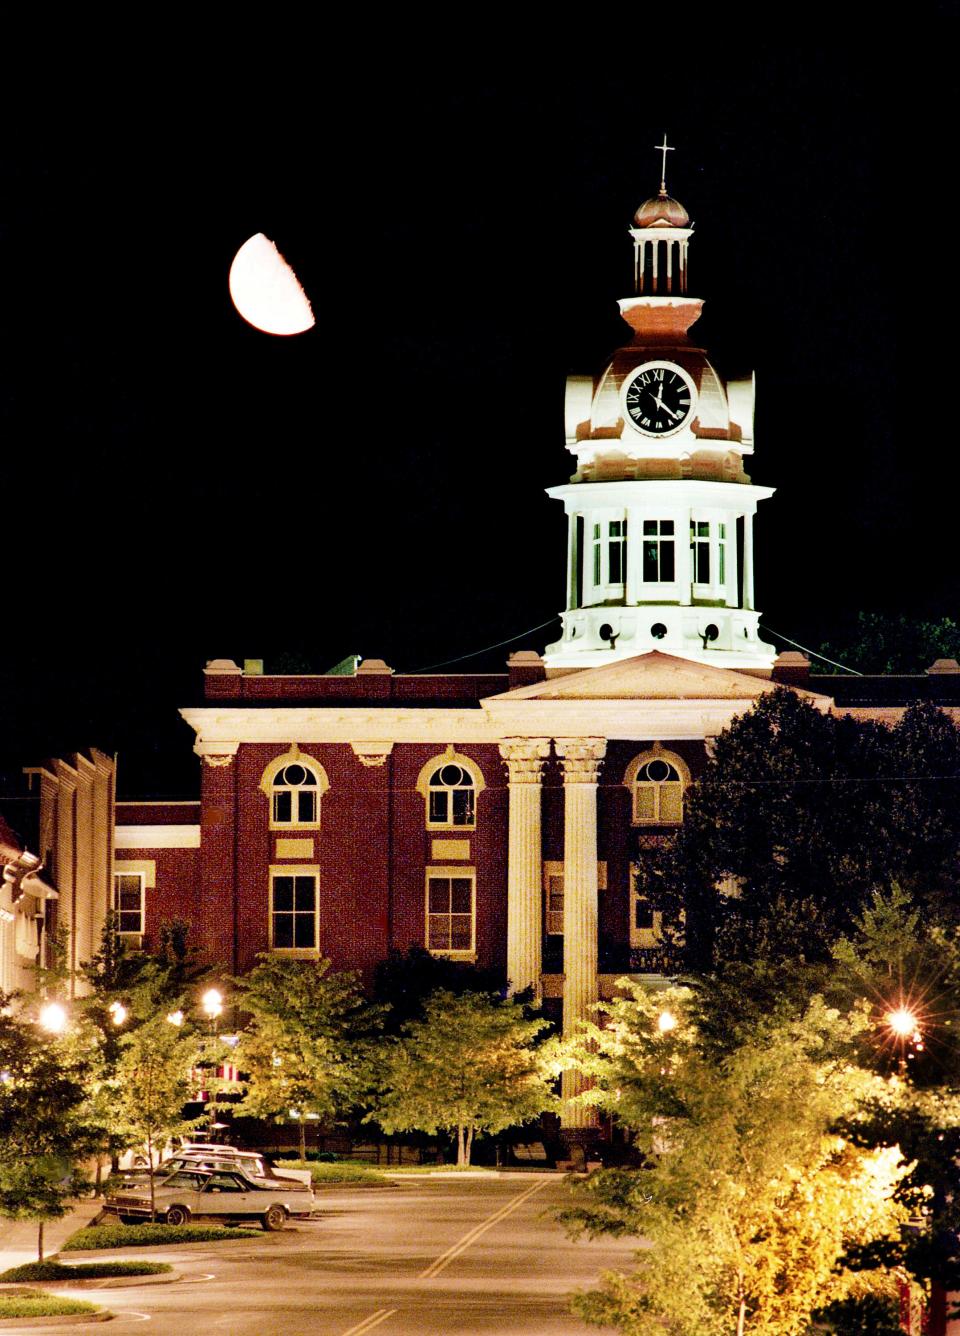 The moon shines its light on the Rutherford County Courthouse in the square of Murfreesboro, Tenn., on a quiet night June 21, 1992.